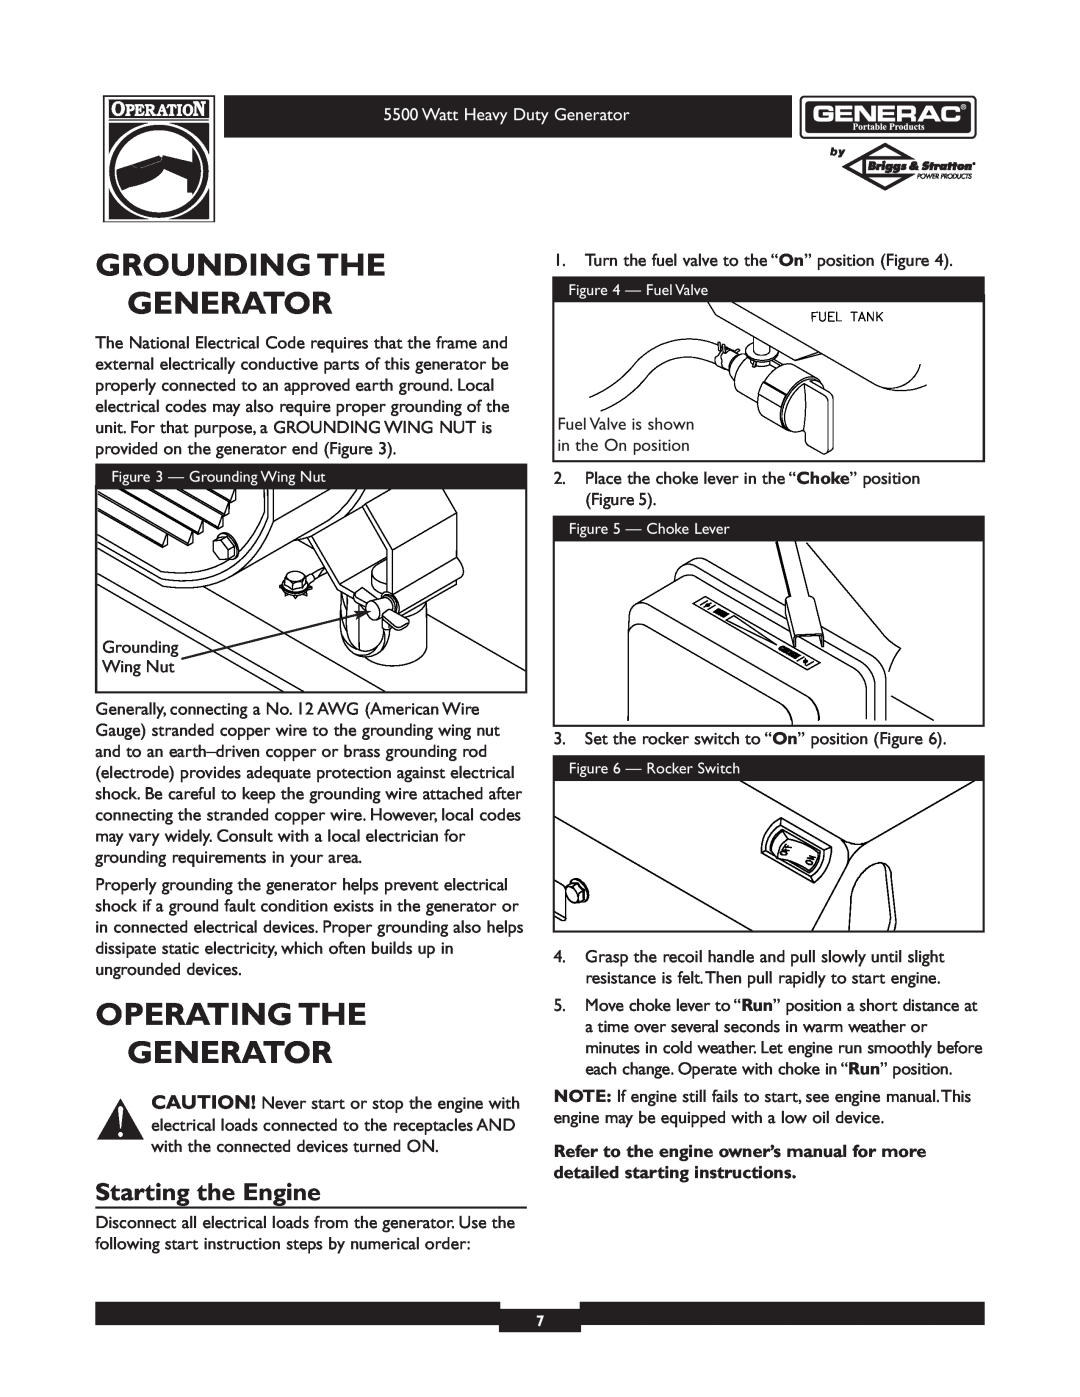 Generac 1654-0 owner manual Grounding The, Operating The Generator, Starting the Engine 